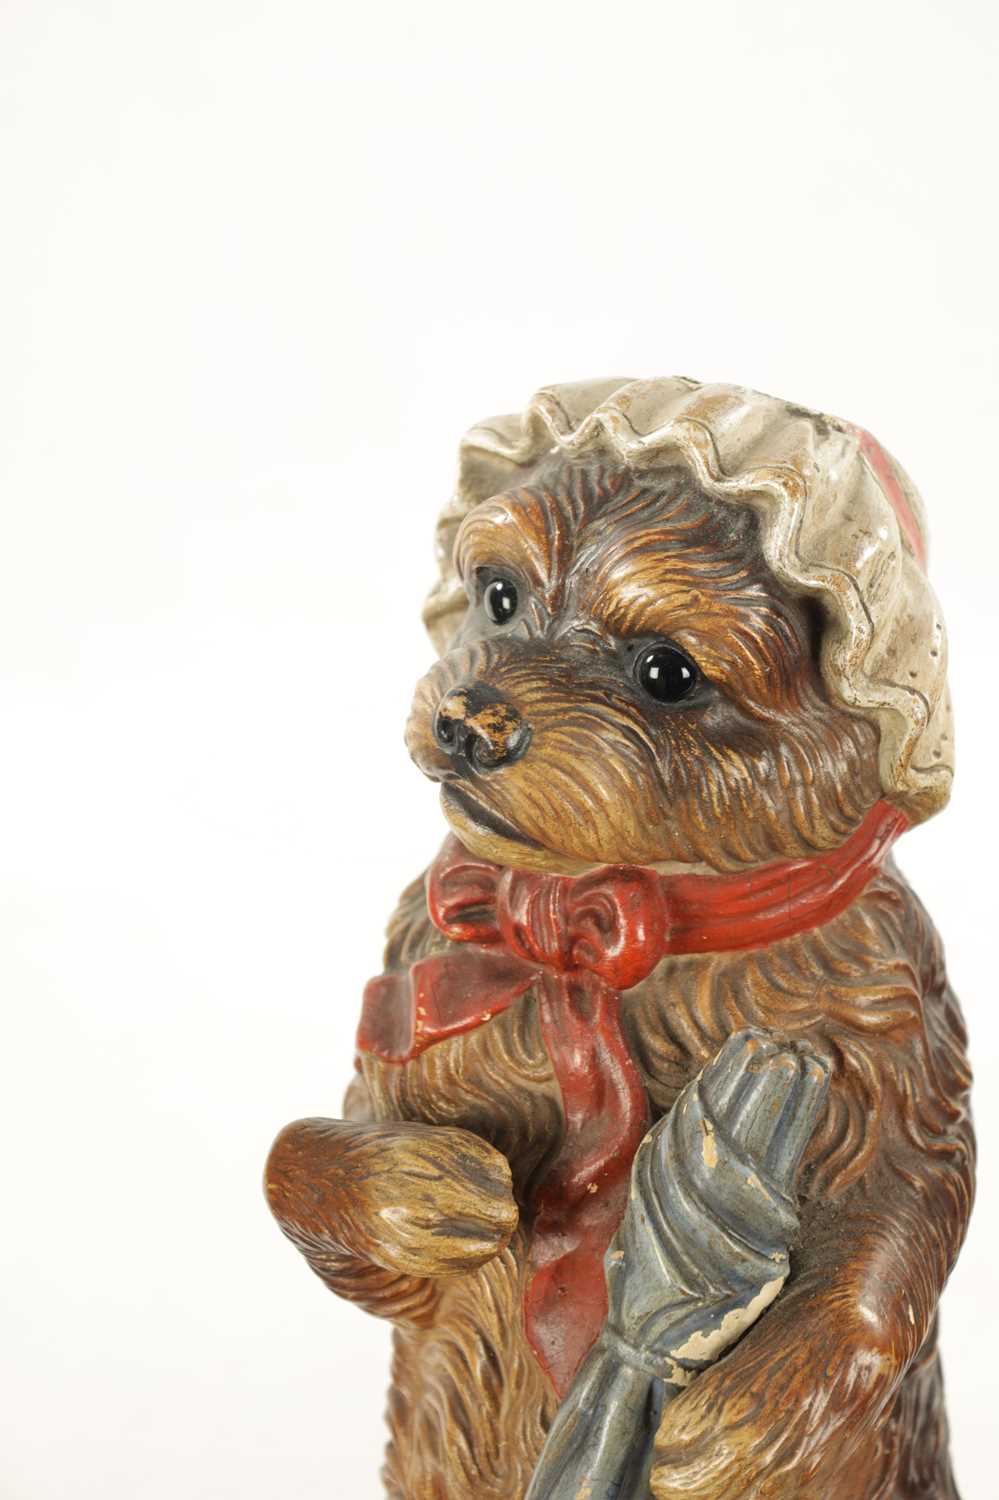 A PAIR OF LATE 19TH CENTURY AUSTRIAN COLD-PAINTED TERRACOTTA MODELS OF DOGS - Image 4 of 8